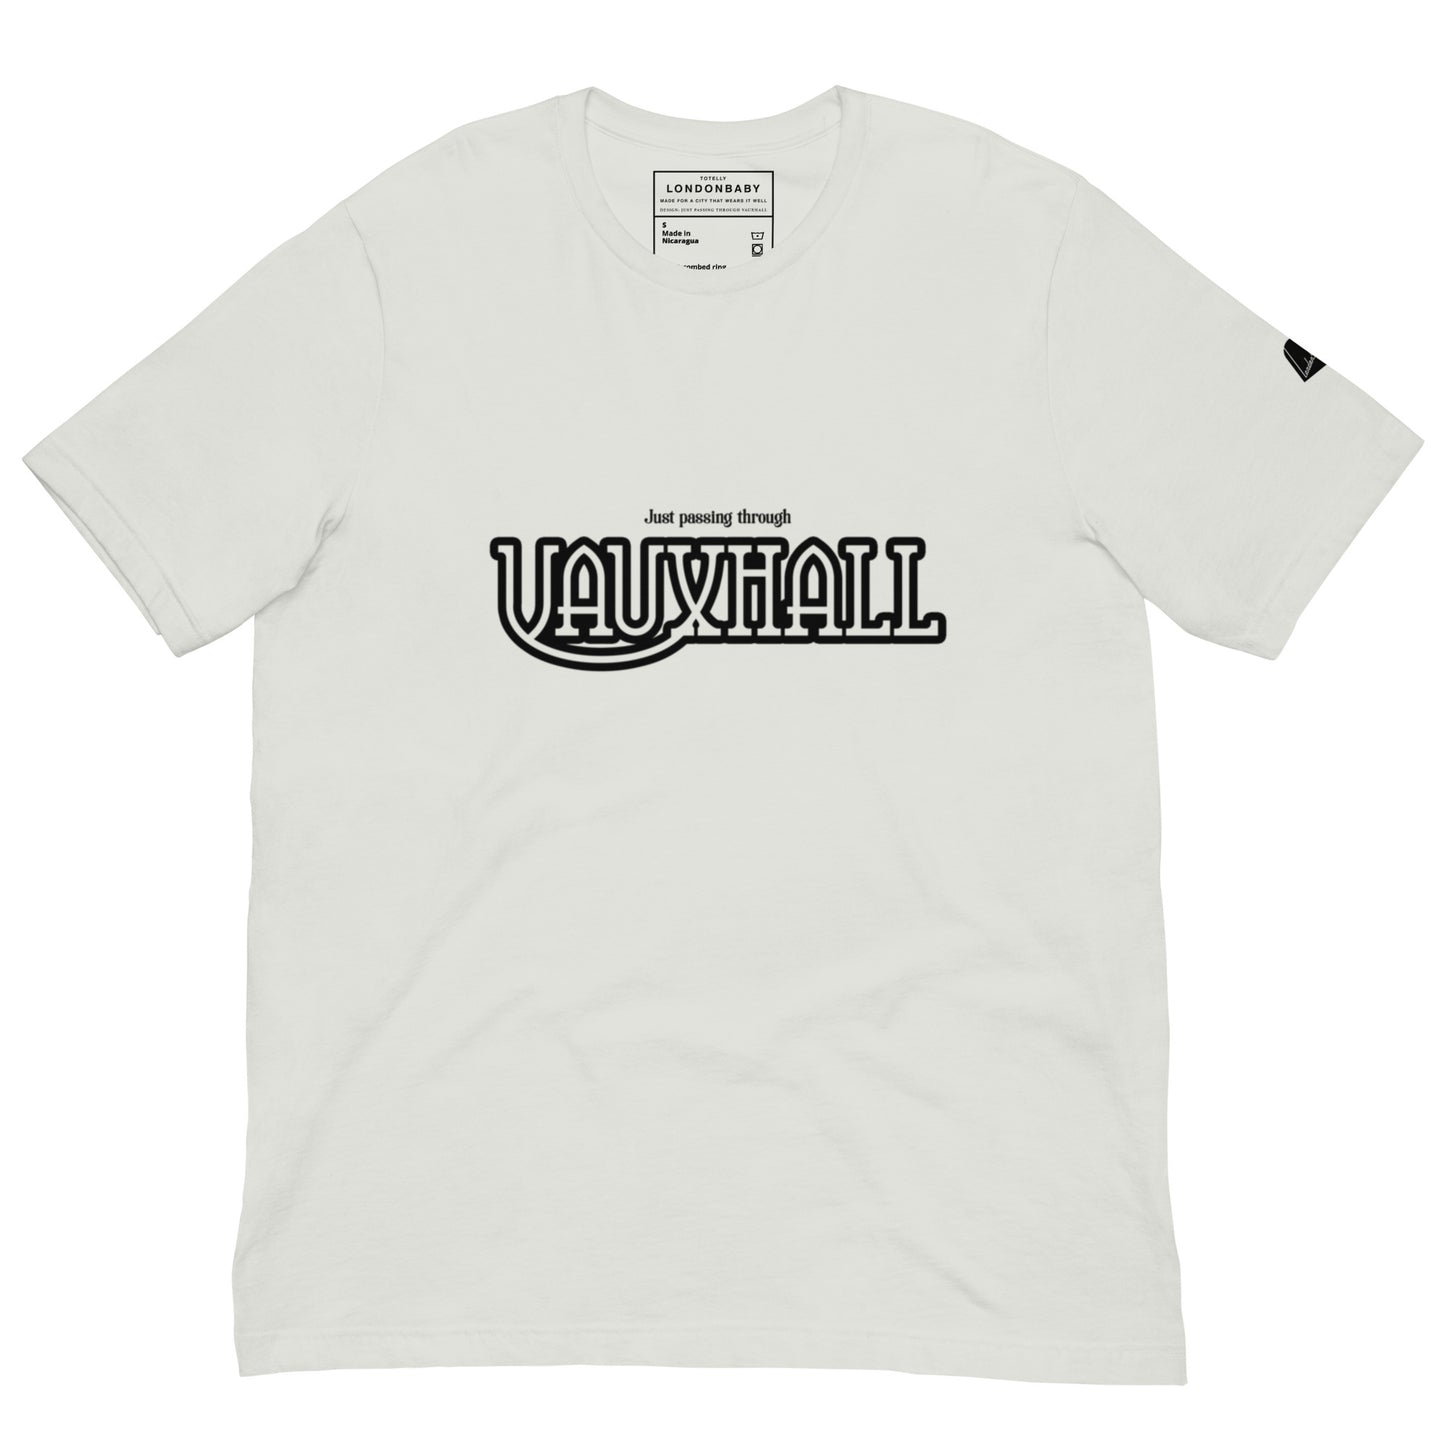 LondonBaby 100% cotton Just Passing Through Vauxhall vintage-style T-shirt - Front